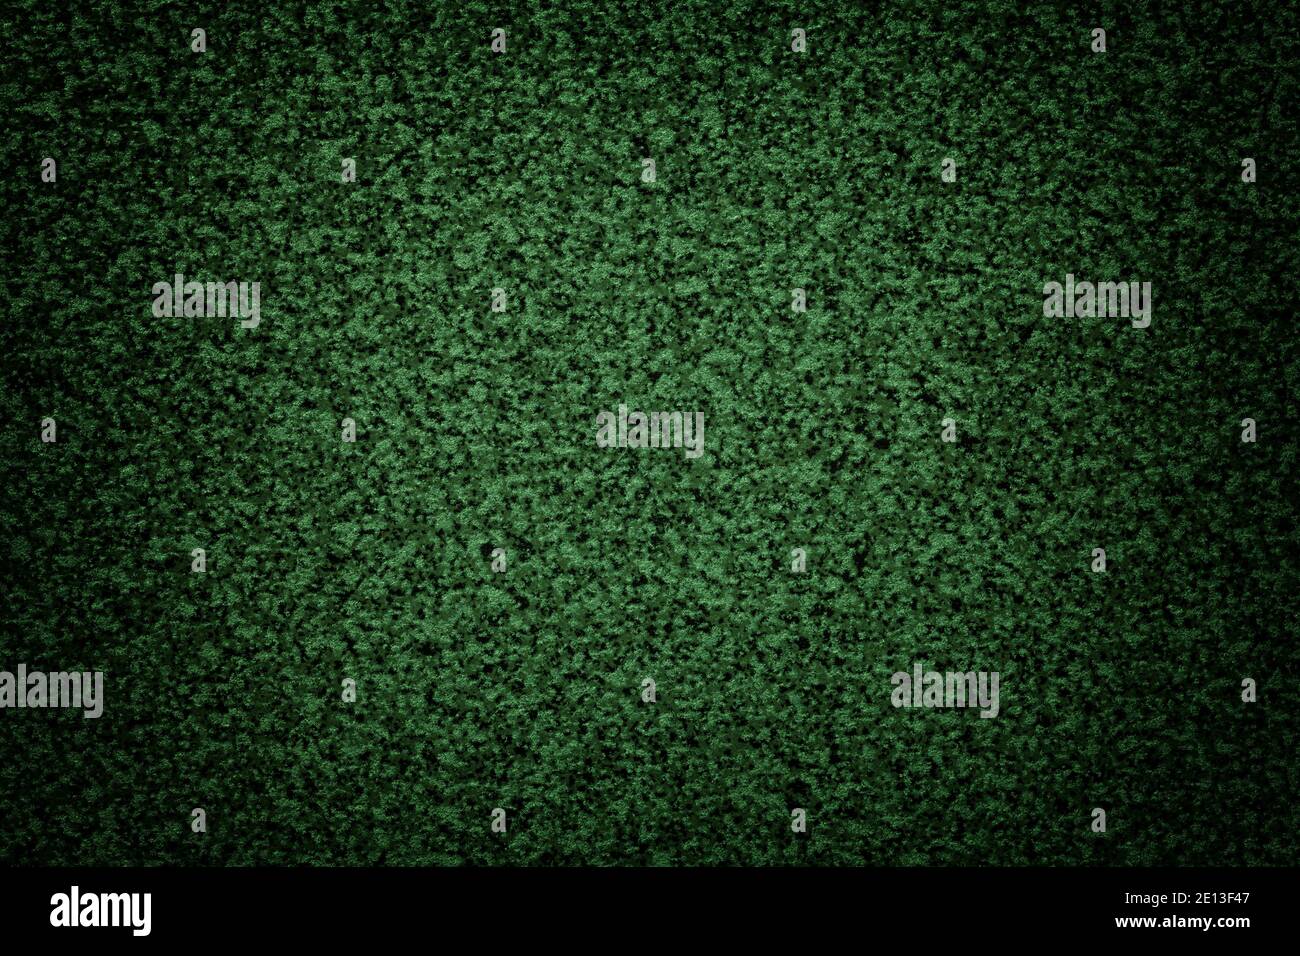 Grainy green background of tabletop with dark vignette. Texture abstract surface with small crumb pattern for interior design and kitchen countertop. Stock Photo